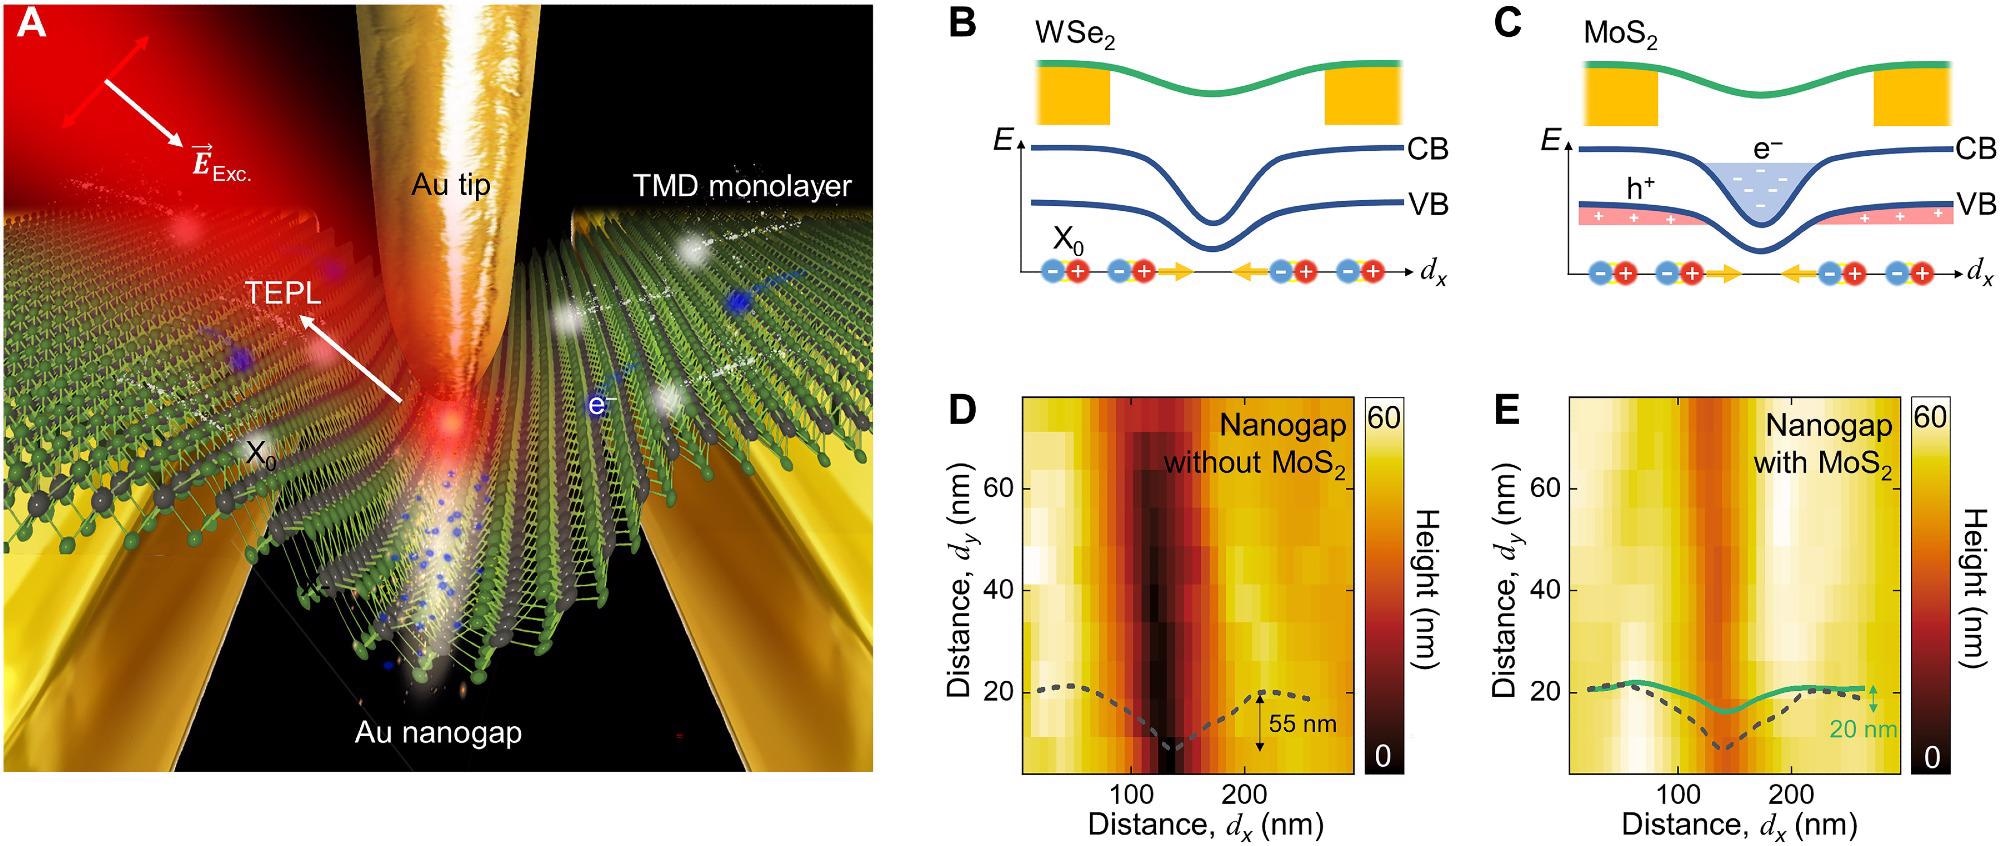 Schematic illustrations of an experimental design and energy diagram. (A) The Au nanogap device and transferred TMD MLs combined with TEPL spectroscopy to probe and control the electric charges (e-) and exciton (X0) dynamics at the nanoscale. Illustrations of the energy band diagram for WSe2 (B) and MoS2. CB, conduction band; VB, valence band. (C) MLs on the nanogap and spatial distributions of electric charges (e- and h+) and photoexcited excitons (X0). AFM topography images and height profiles of the nanogap without (D) and with (E) MoS2 ML exhibiting a wrinkled crystal structure, which gives rise to a nanoscale strain gradient.